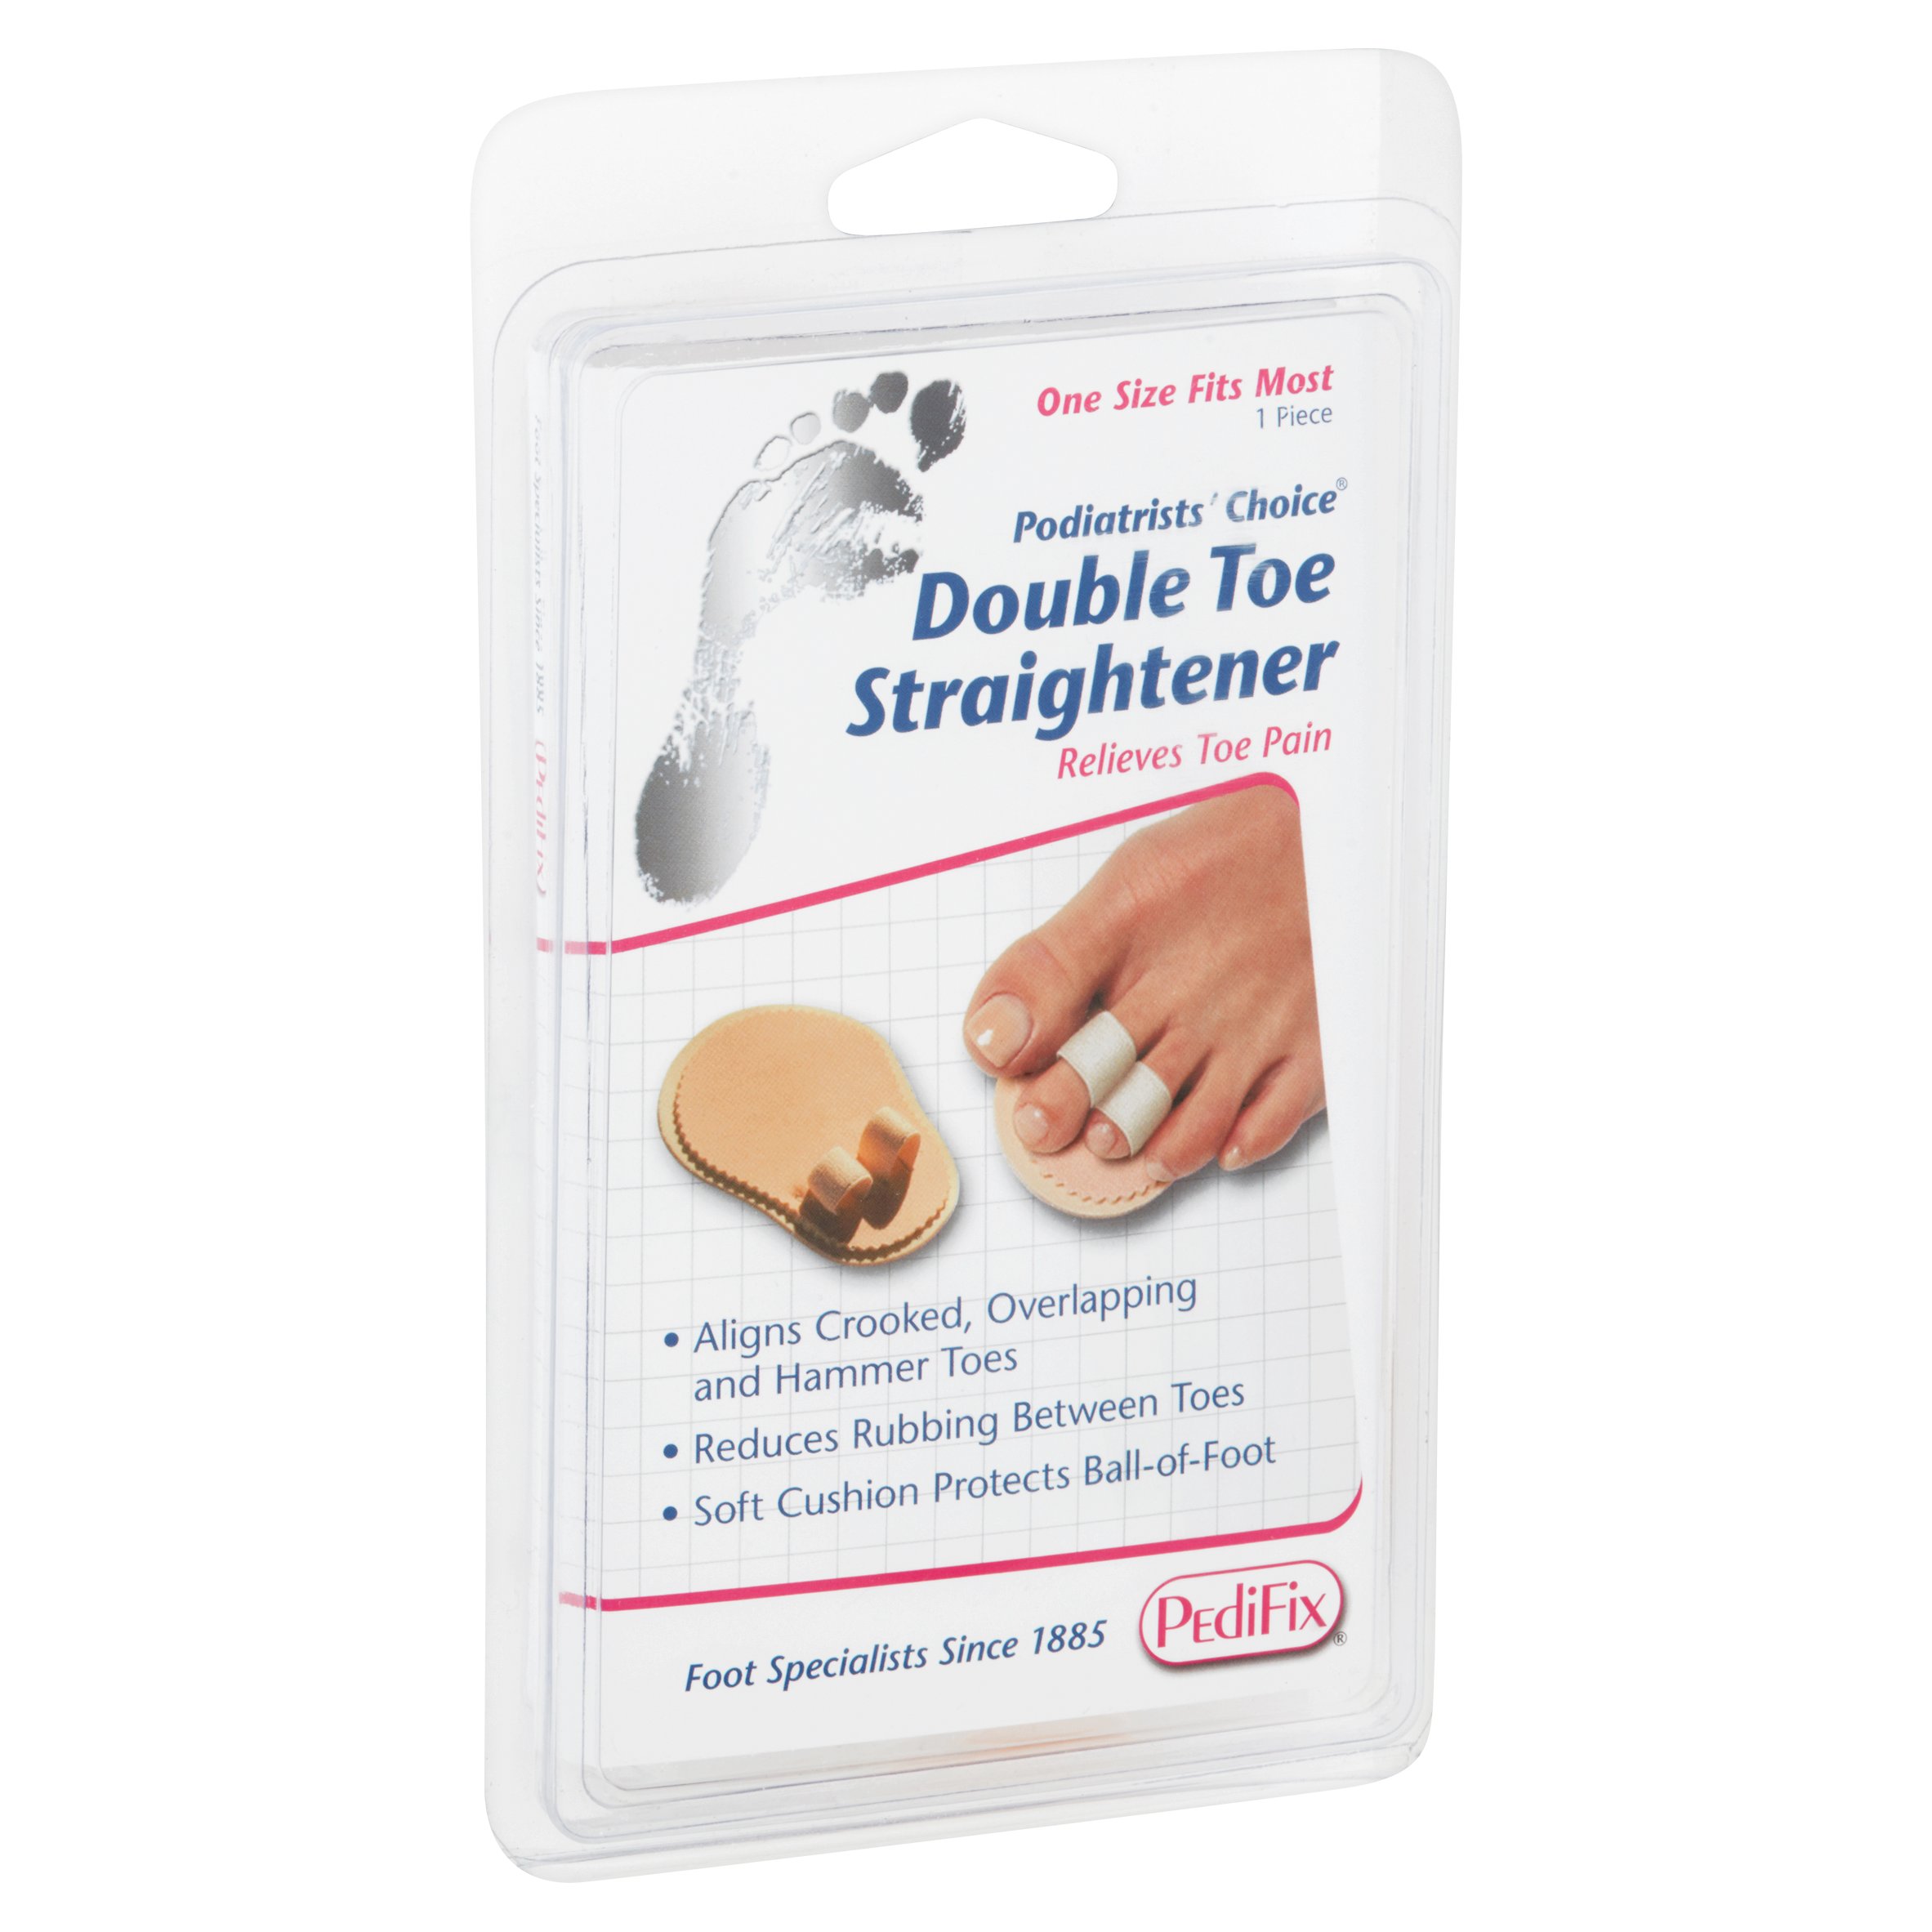 PediFix Double Toe Straightener One Size Fits Most [#P57] 1 Each - image 2 of 5